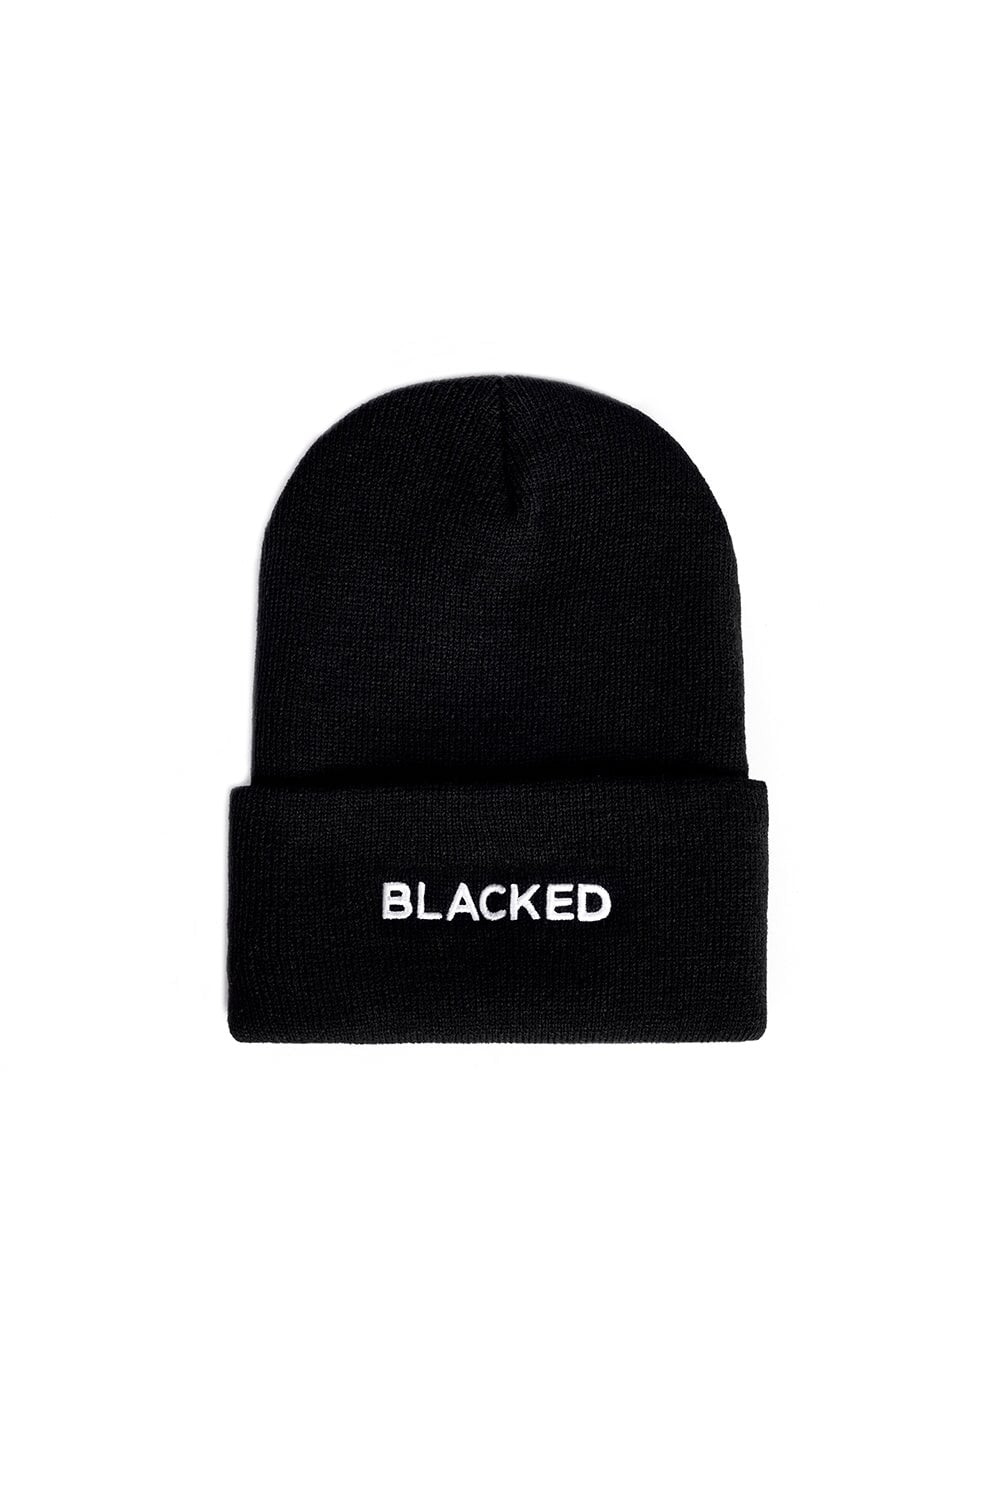 Official BLACKED undergarments now available! Blacked Underwear is Finally  Here! : r/BlackedWearHomemade